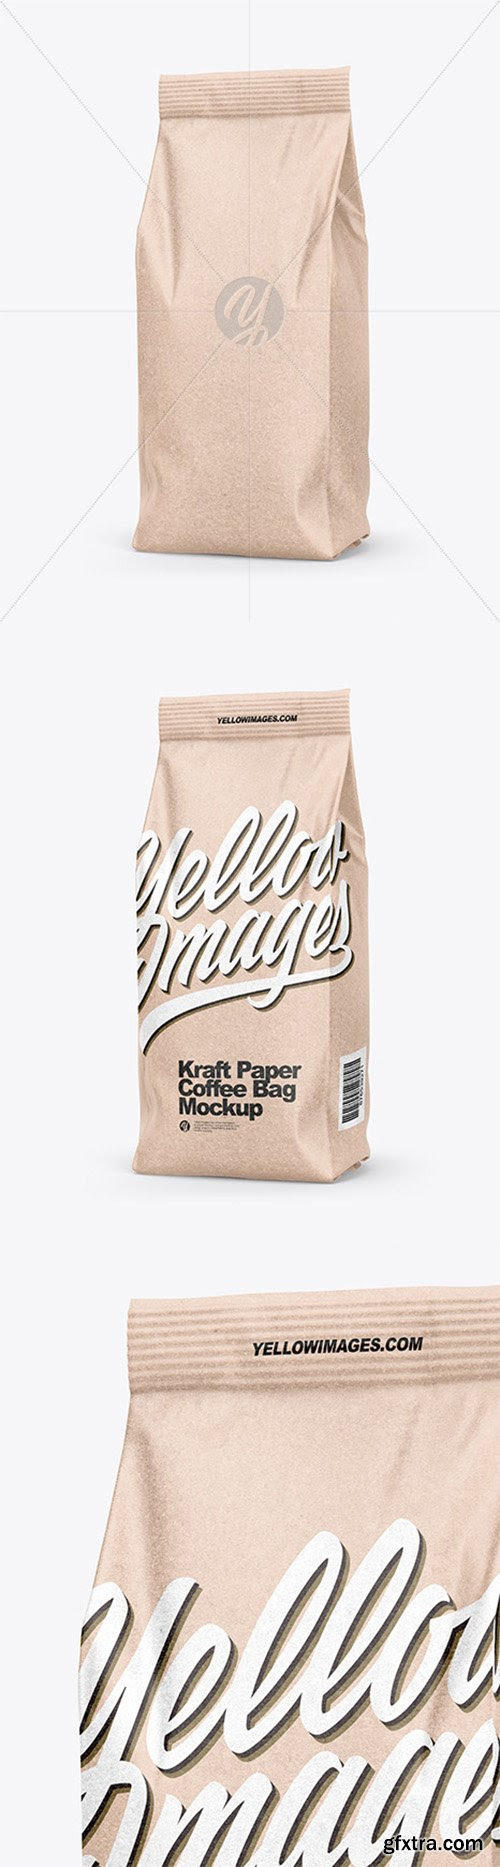 Yellowimages Mockups Kraft Paper 3 Pack Red Liquid Bottle Carrier